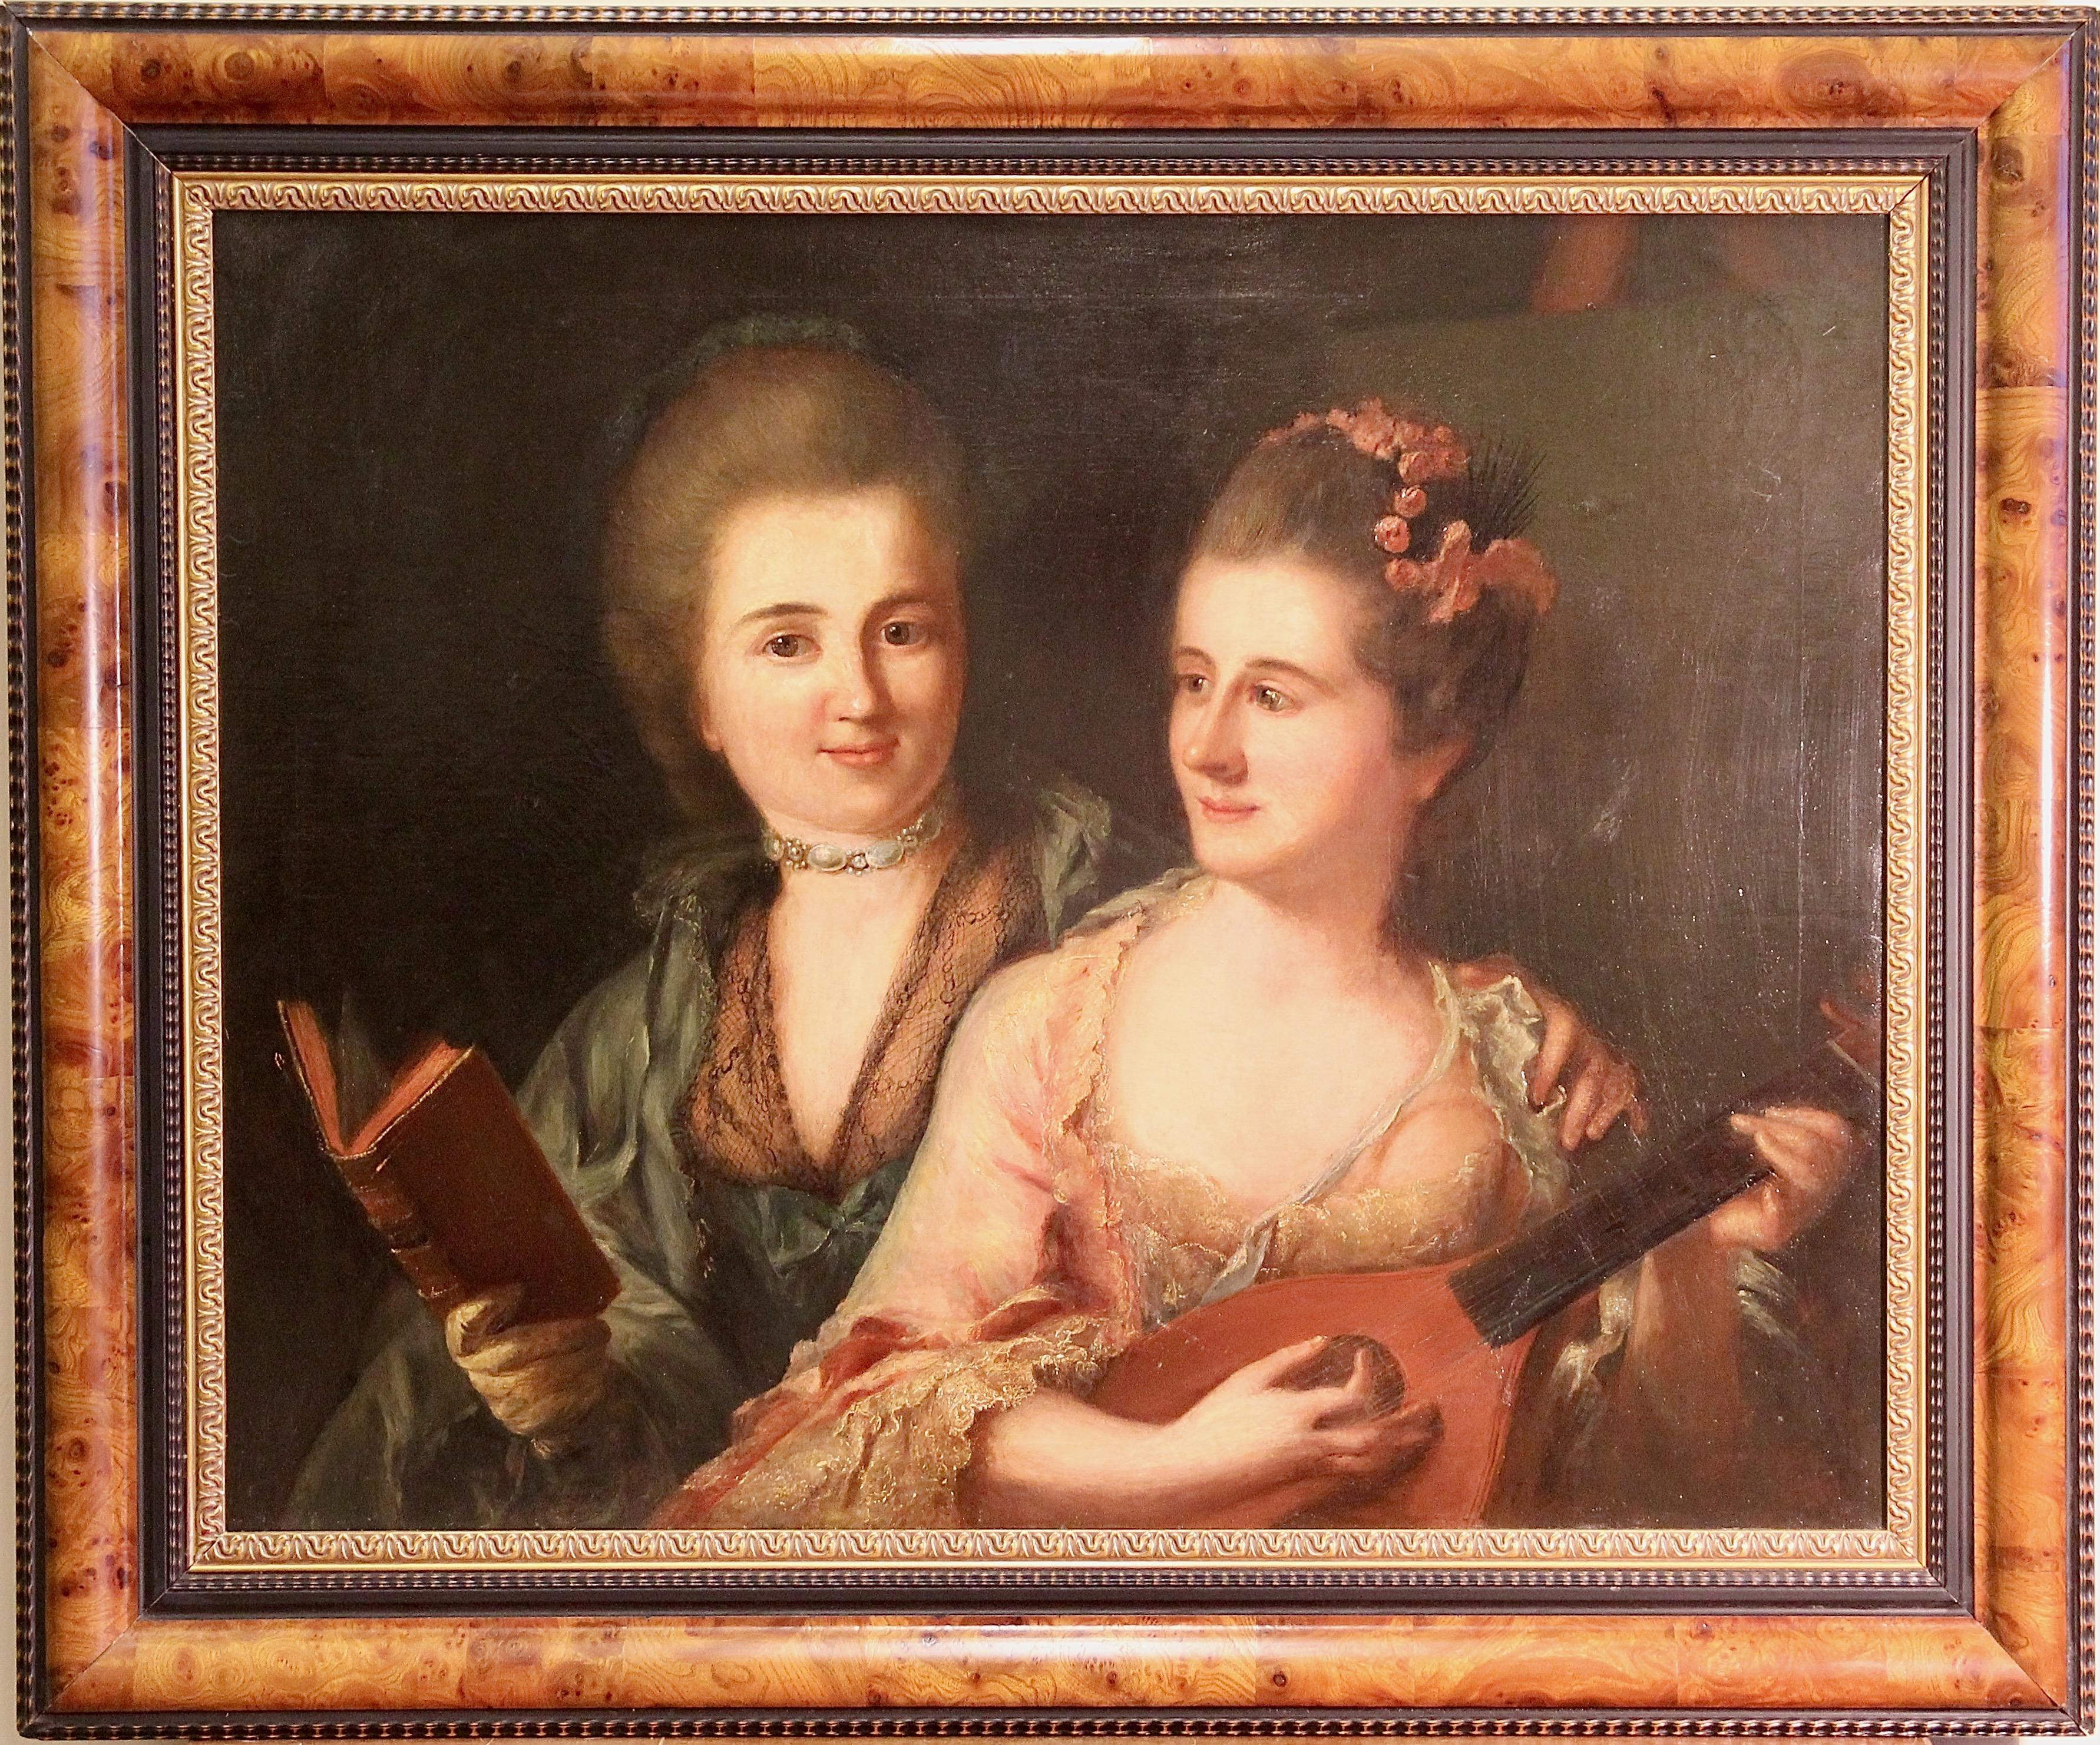 Unknown Portrait Painting - Antique Painting, oil on Canvas. Portrait of two Ladies. The Mandolin Player.